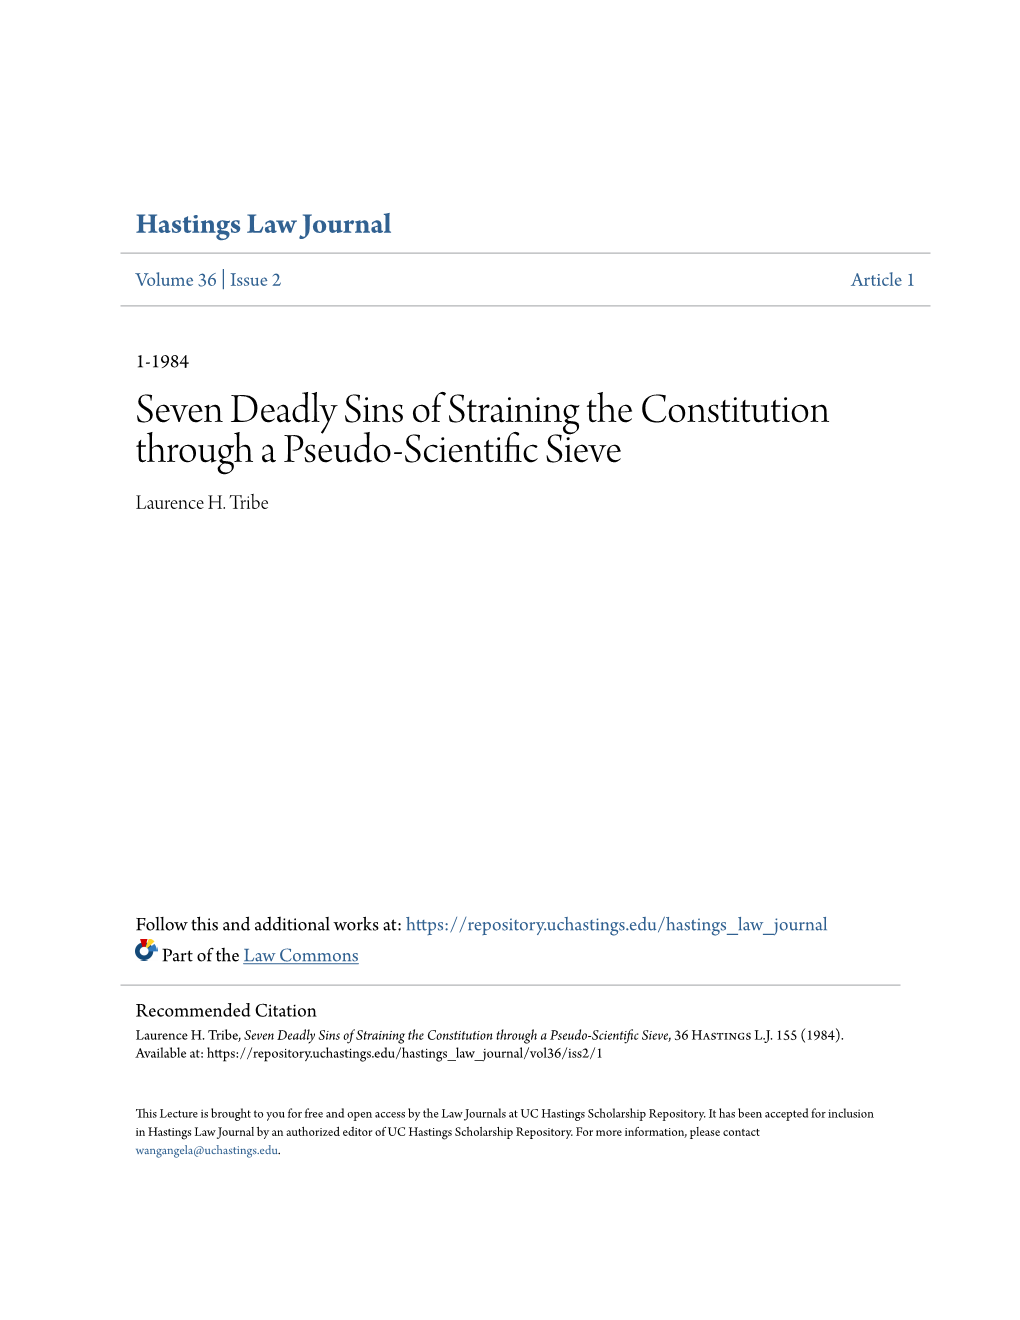 Seven Deadly Sins of Straining the Constitution Through a Pseudo-Scientific Ieves Laurence H